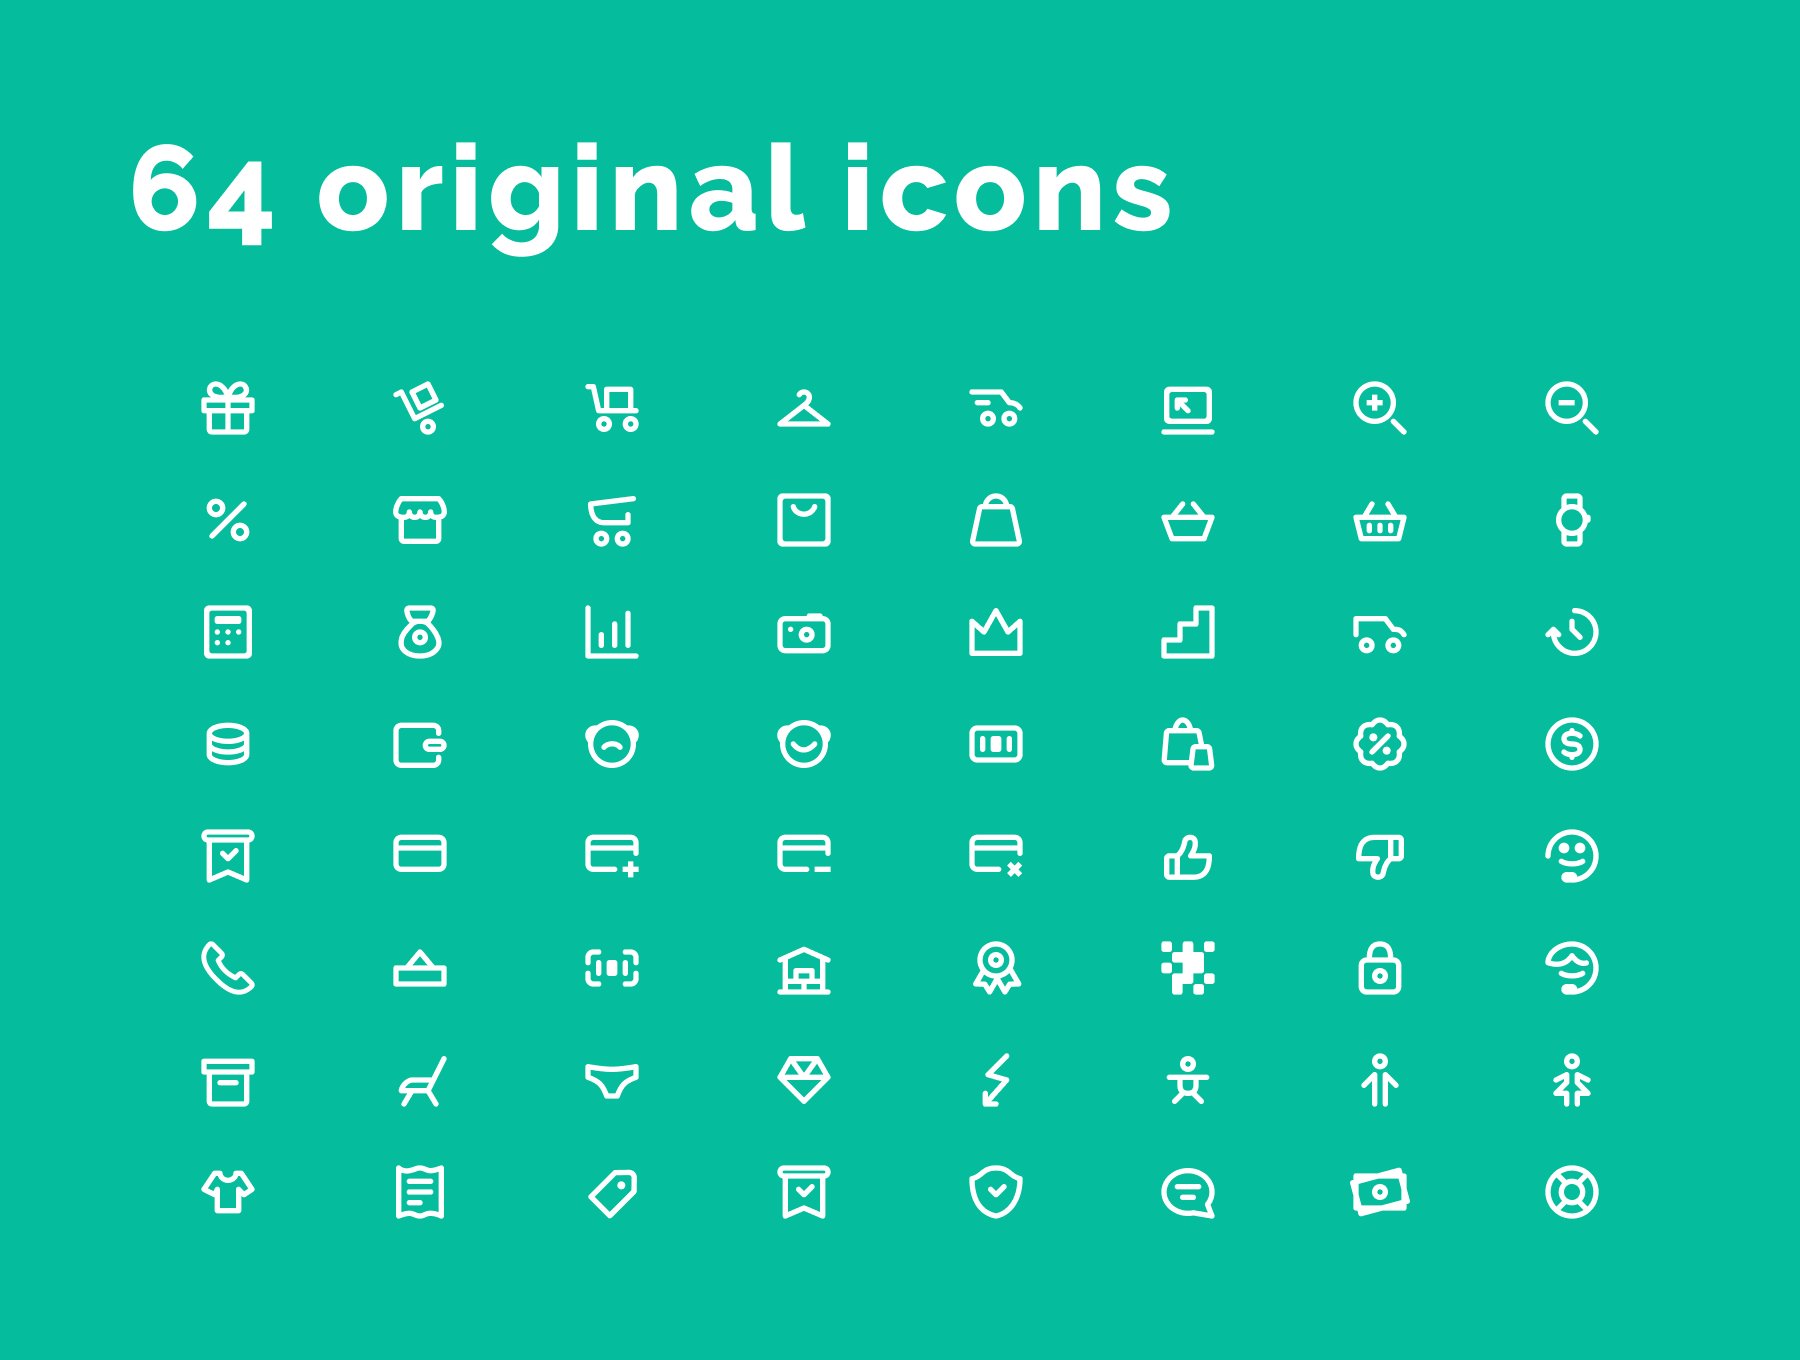 Shopping icons set preview image.